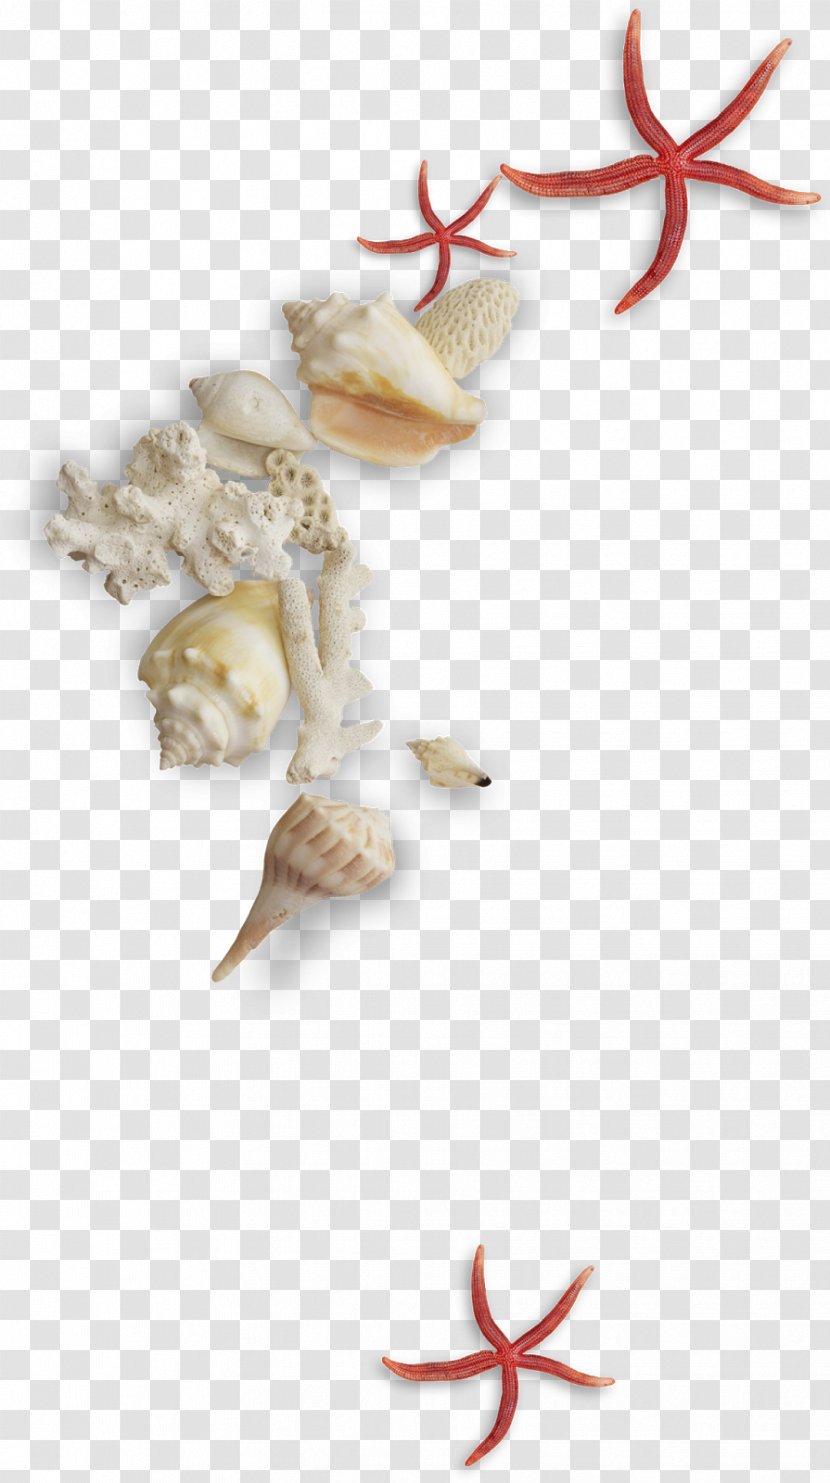 Seashell Clip Art - Watercolor Painting - Conch Transparent PNG